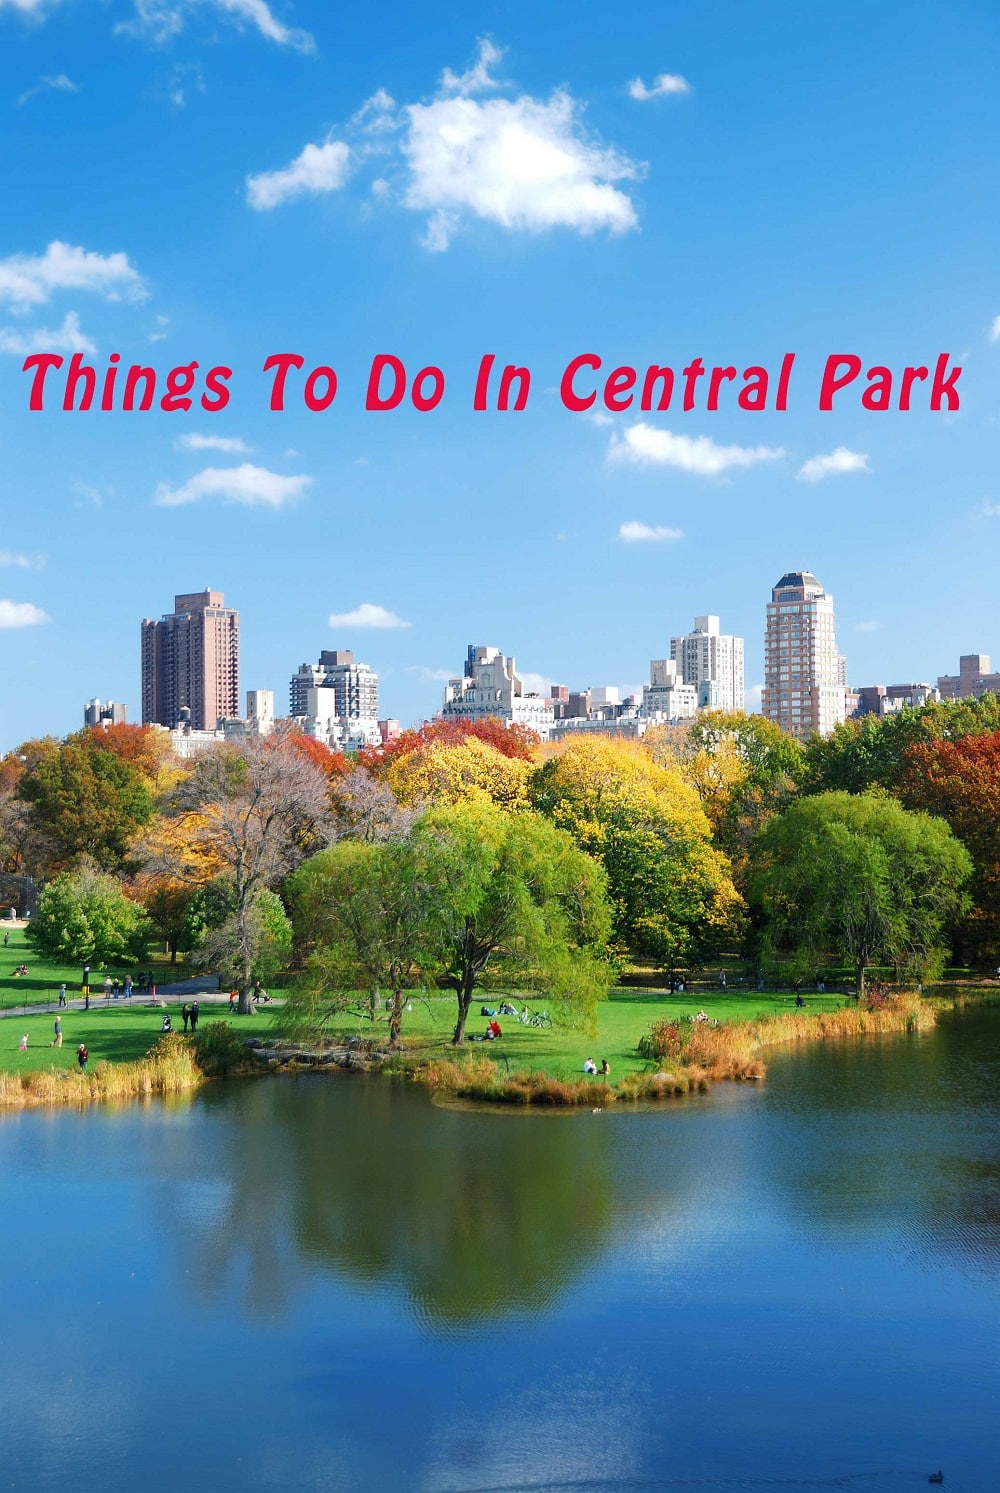 New York City Central Park in Autumn